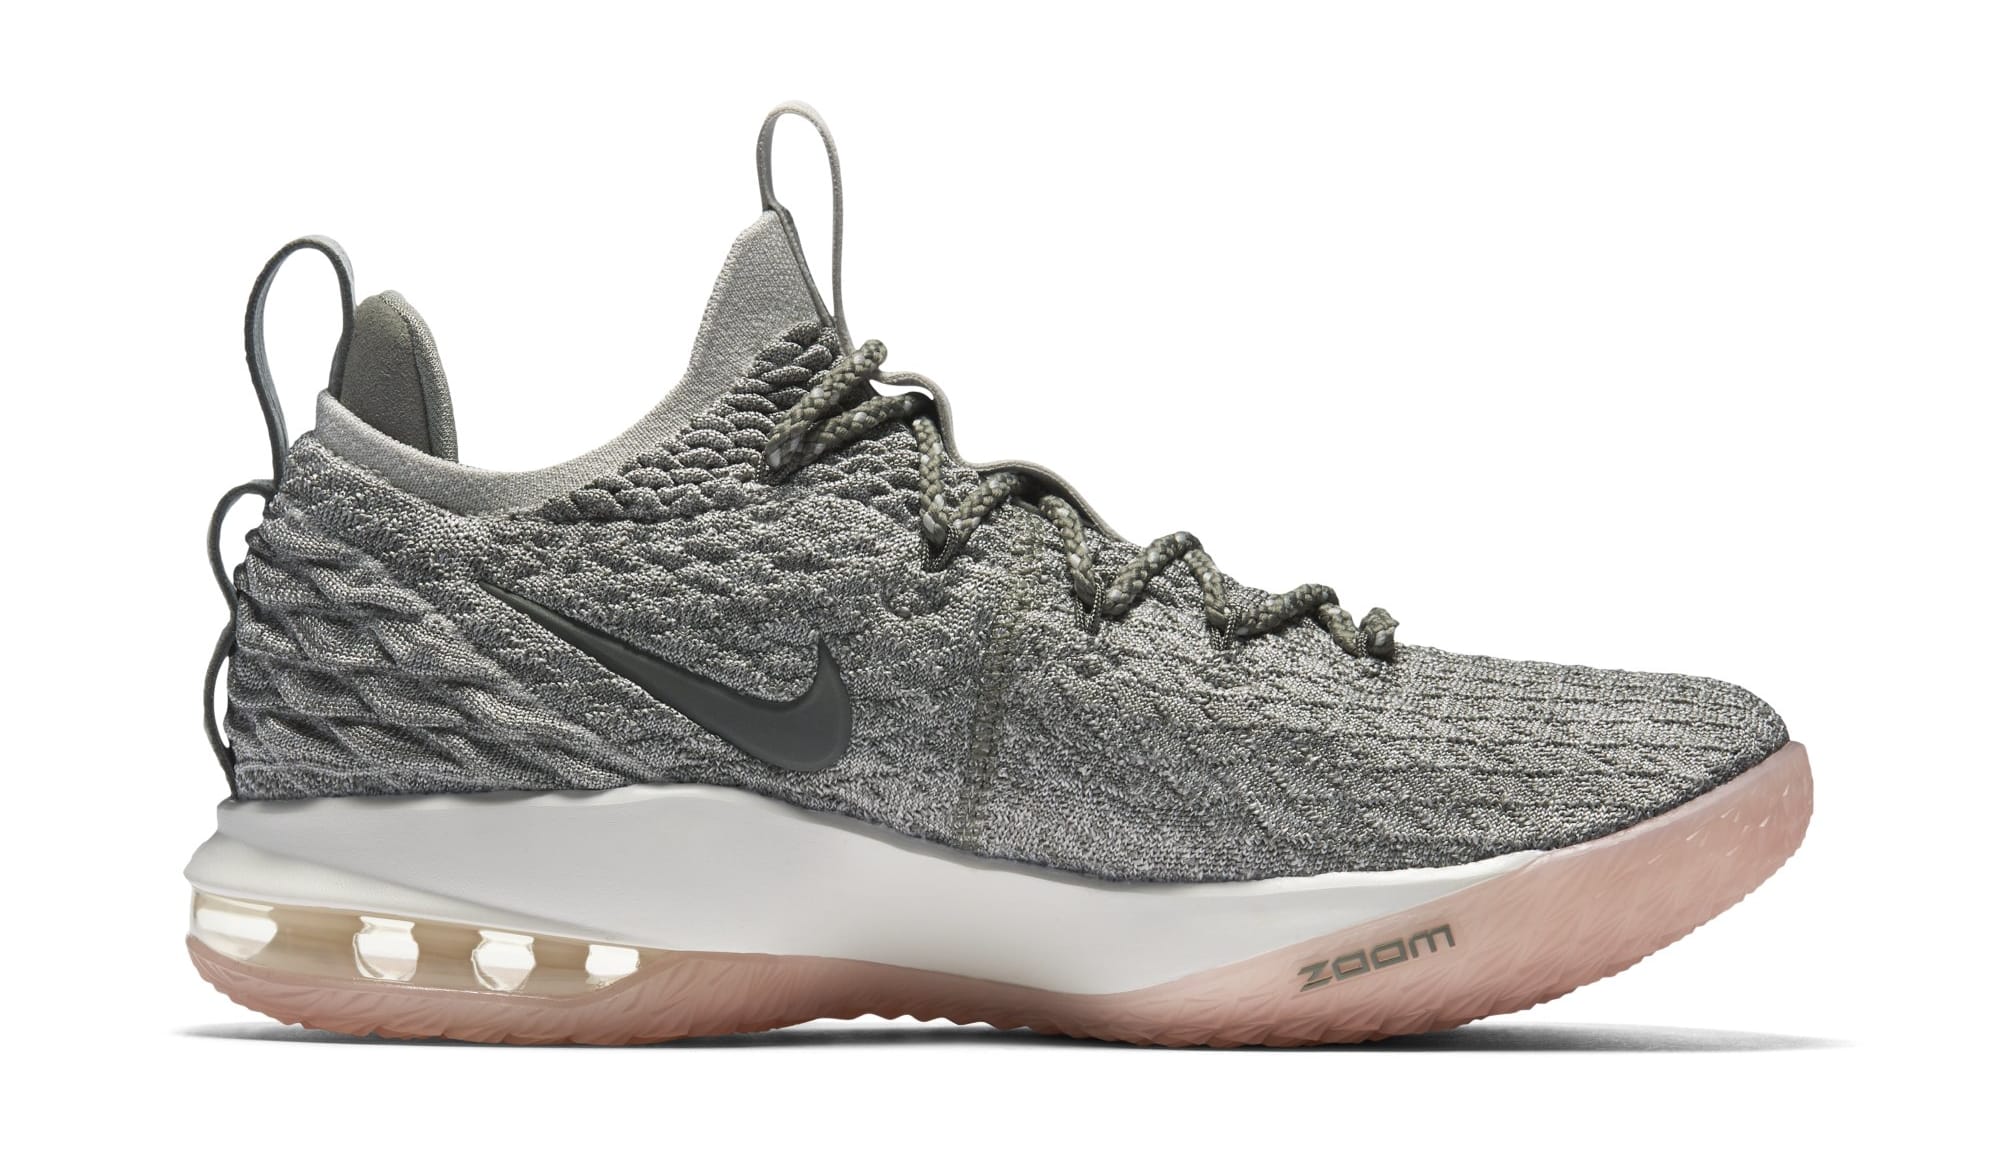 The 'Light Bone' LeBron 15 Low Releases This Weekend